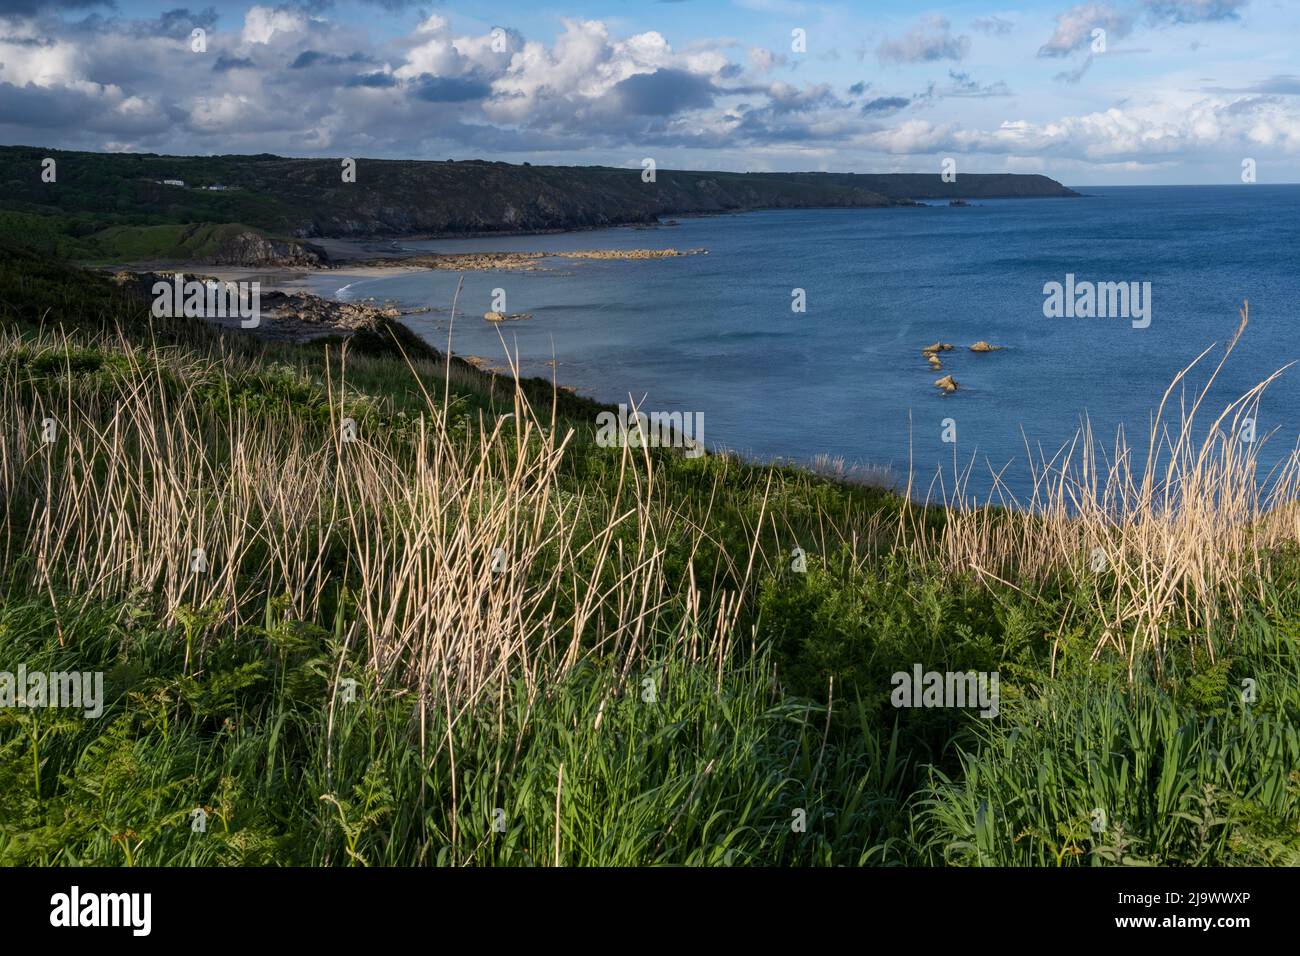 A view of the Kennack Sands area on the south coast of Cornwall, England. Stock Photo